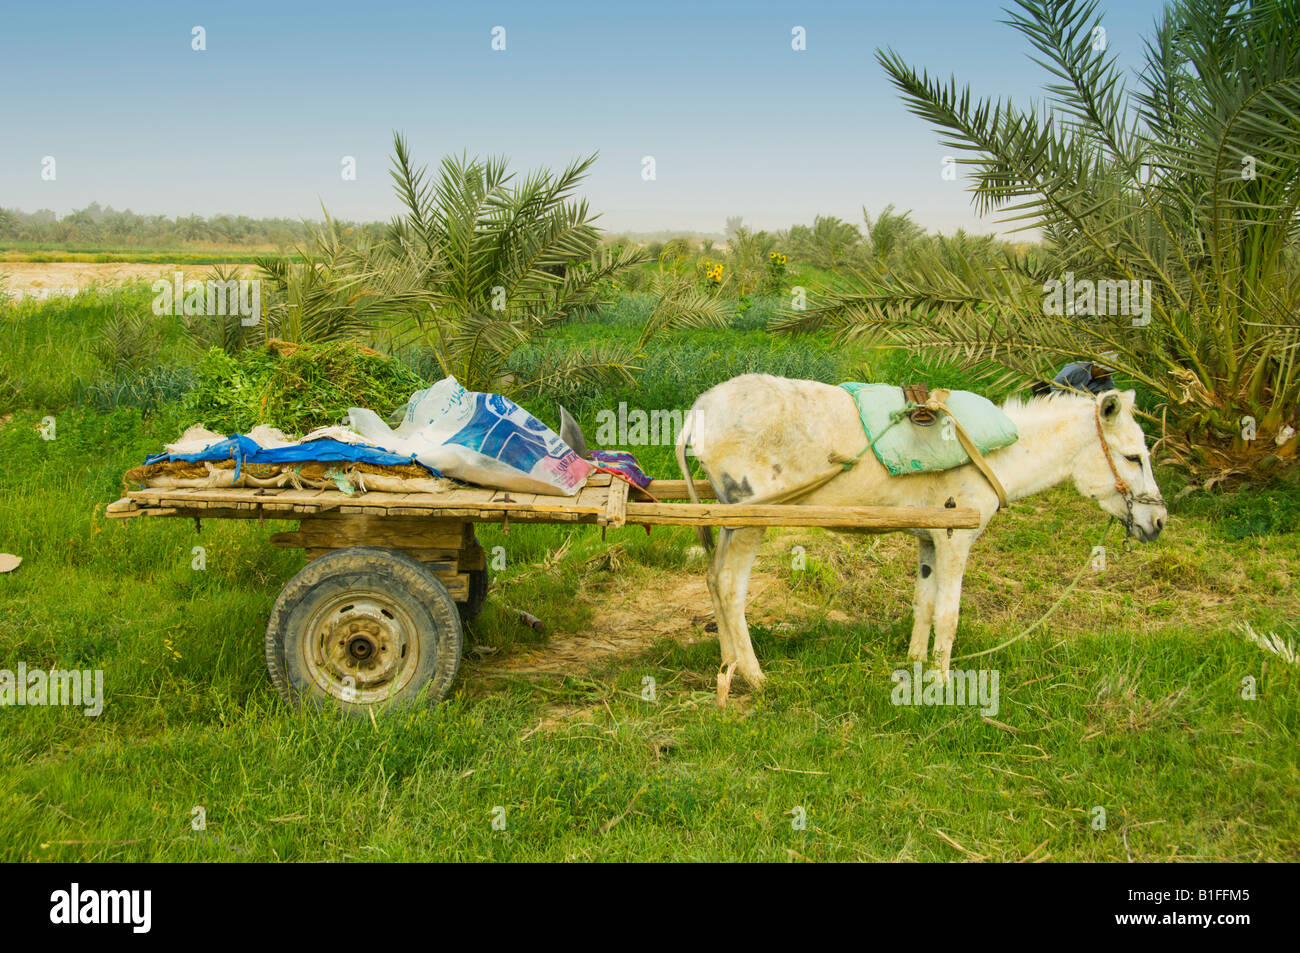 A donkey and cart loaded with alfalfa in a field in the Bahariya Oasis Egypt Stock Photo